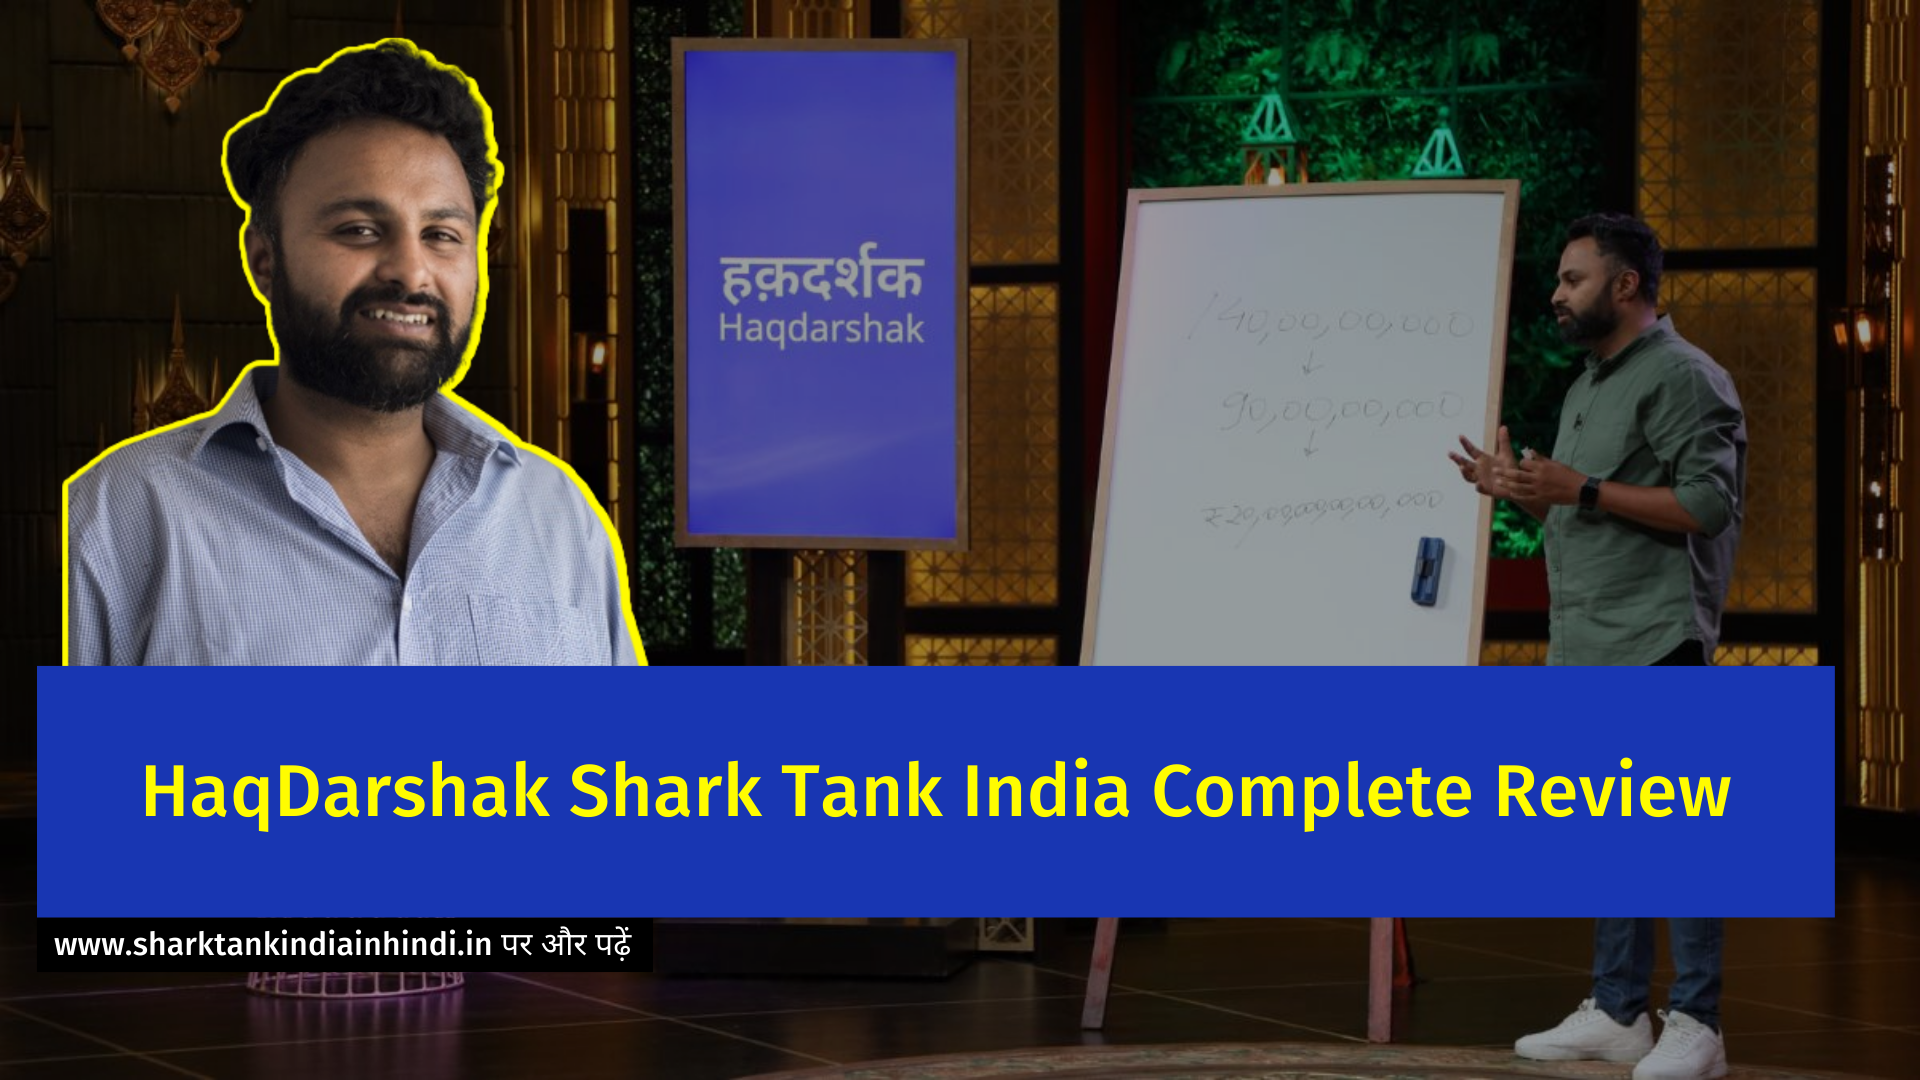 HaqDarshak Shark Tank India Complete Review